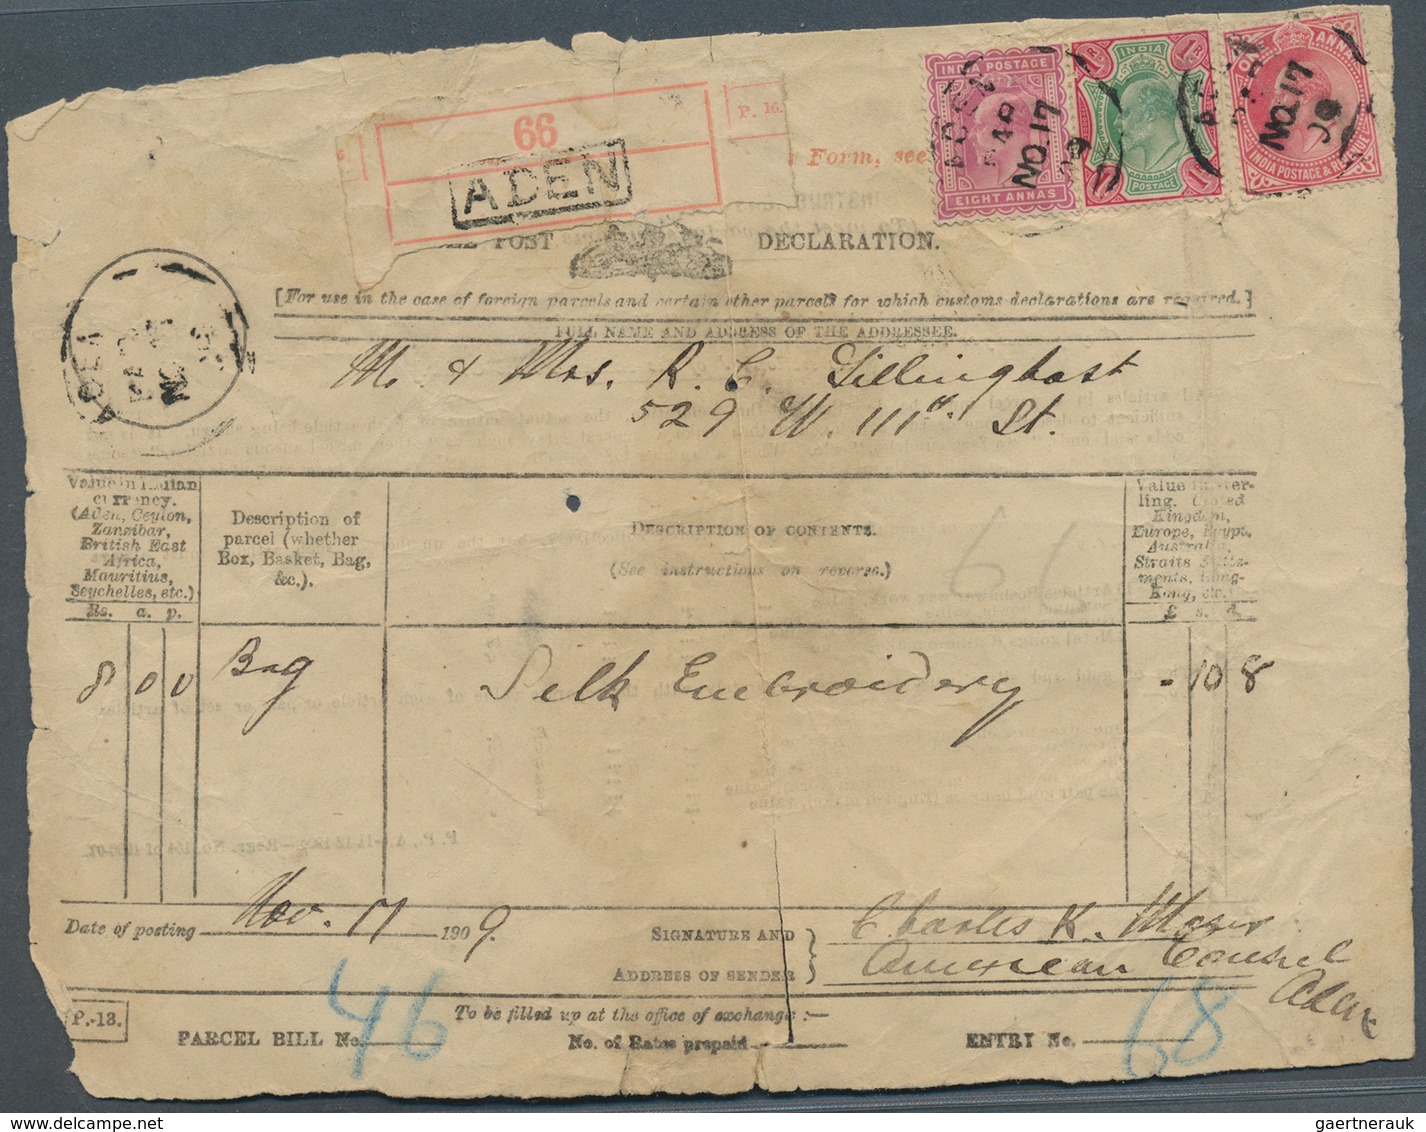 Aden: 1909 Post Declaration For Parcel, Franked With India KE 1r., 8a. And 1a. Tied With "ADEN/PAR/N - Yemen